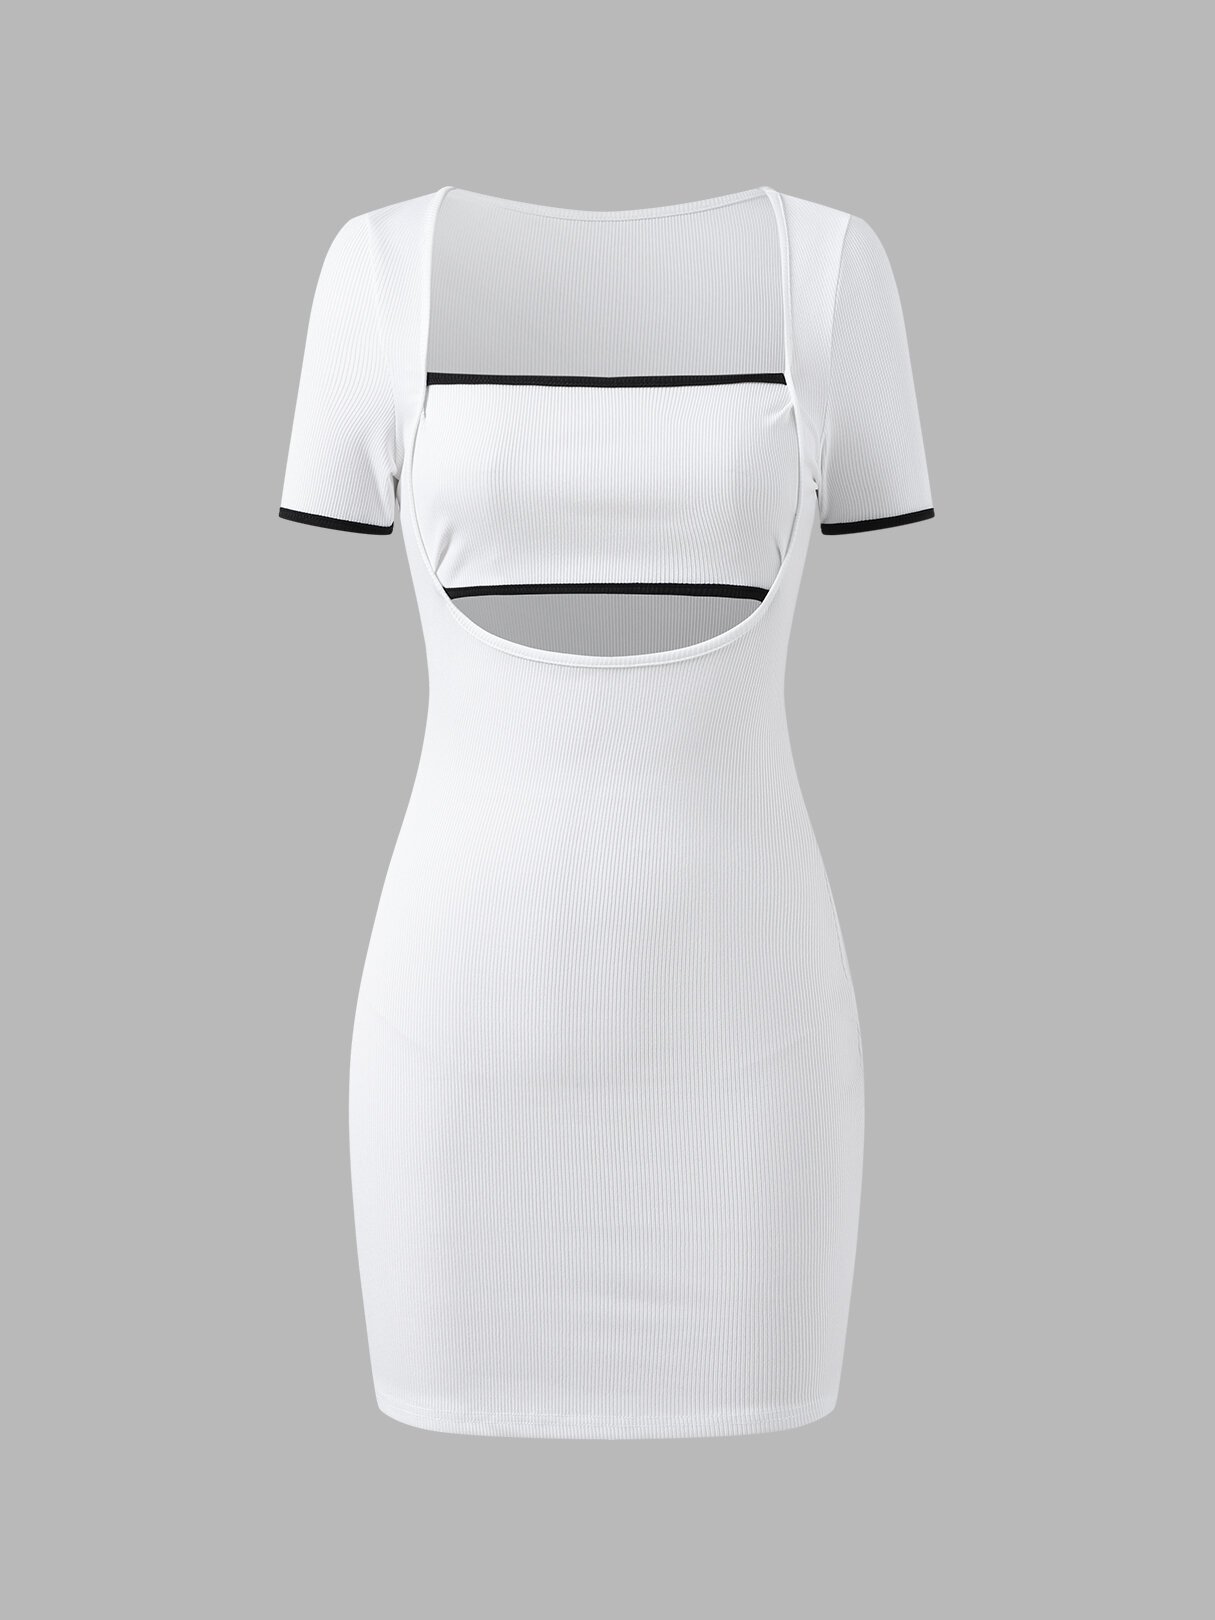 Contrast Cut Out Square Collar Short Sleeve Mini Dress